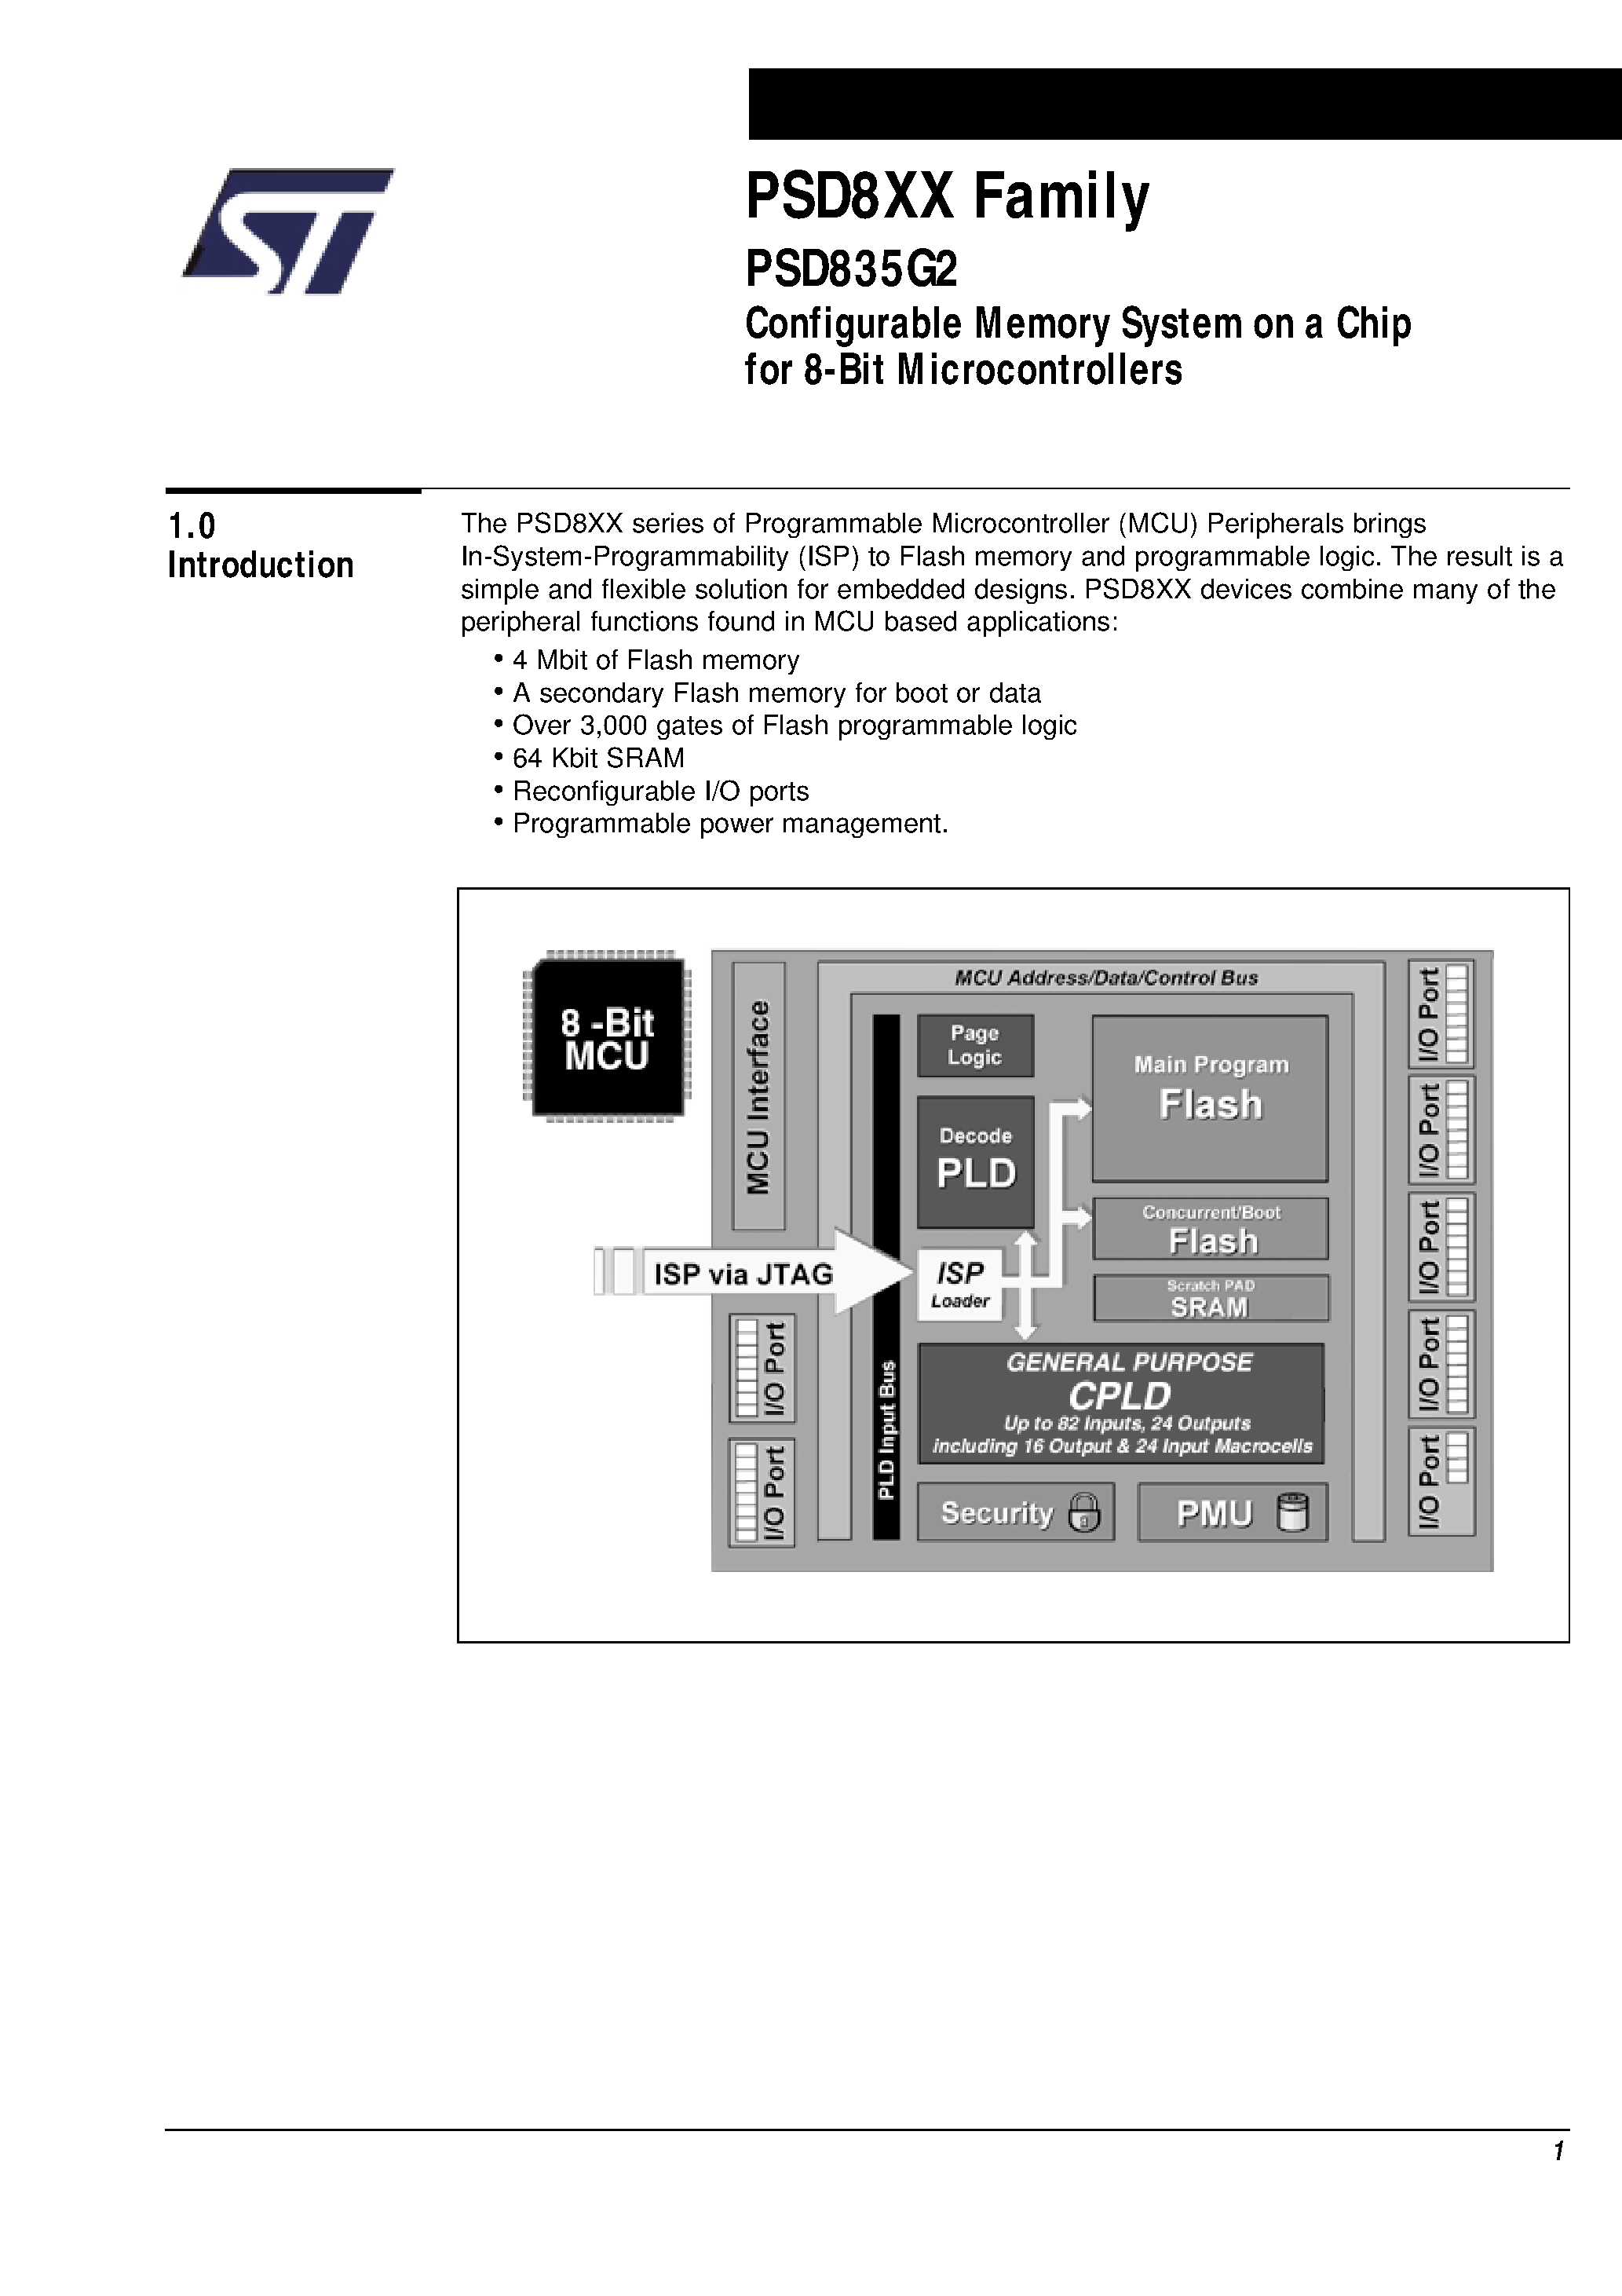 Datasheet PSD835F1-A-20M - Configurable Memory System on a Chip for 8-Bit Microcontrollers page 2